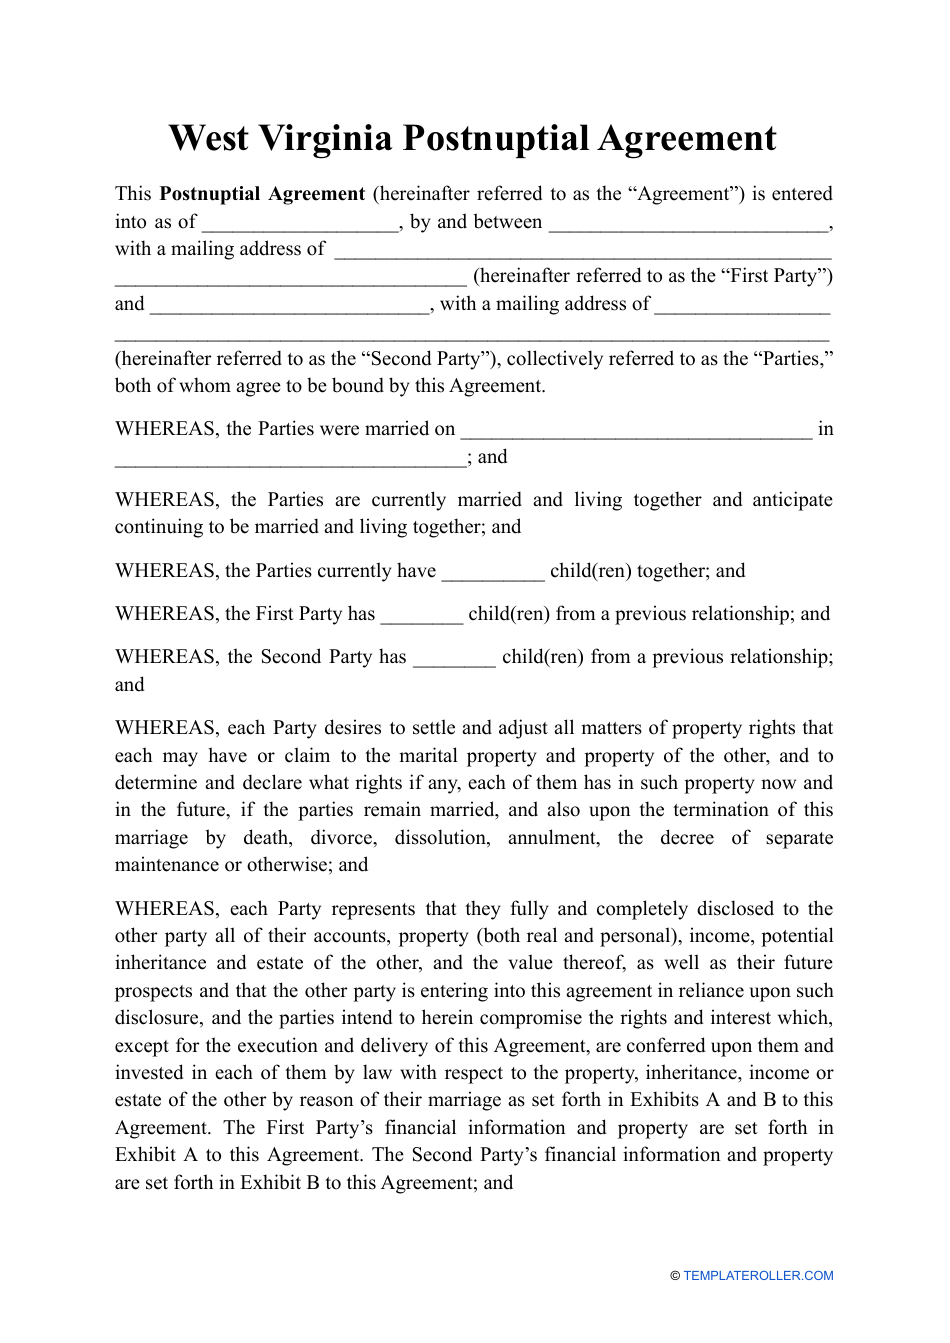 Postnuptial Agreement Template - West Virginia, Page 1